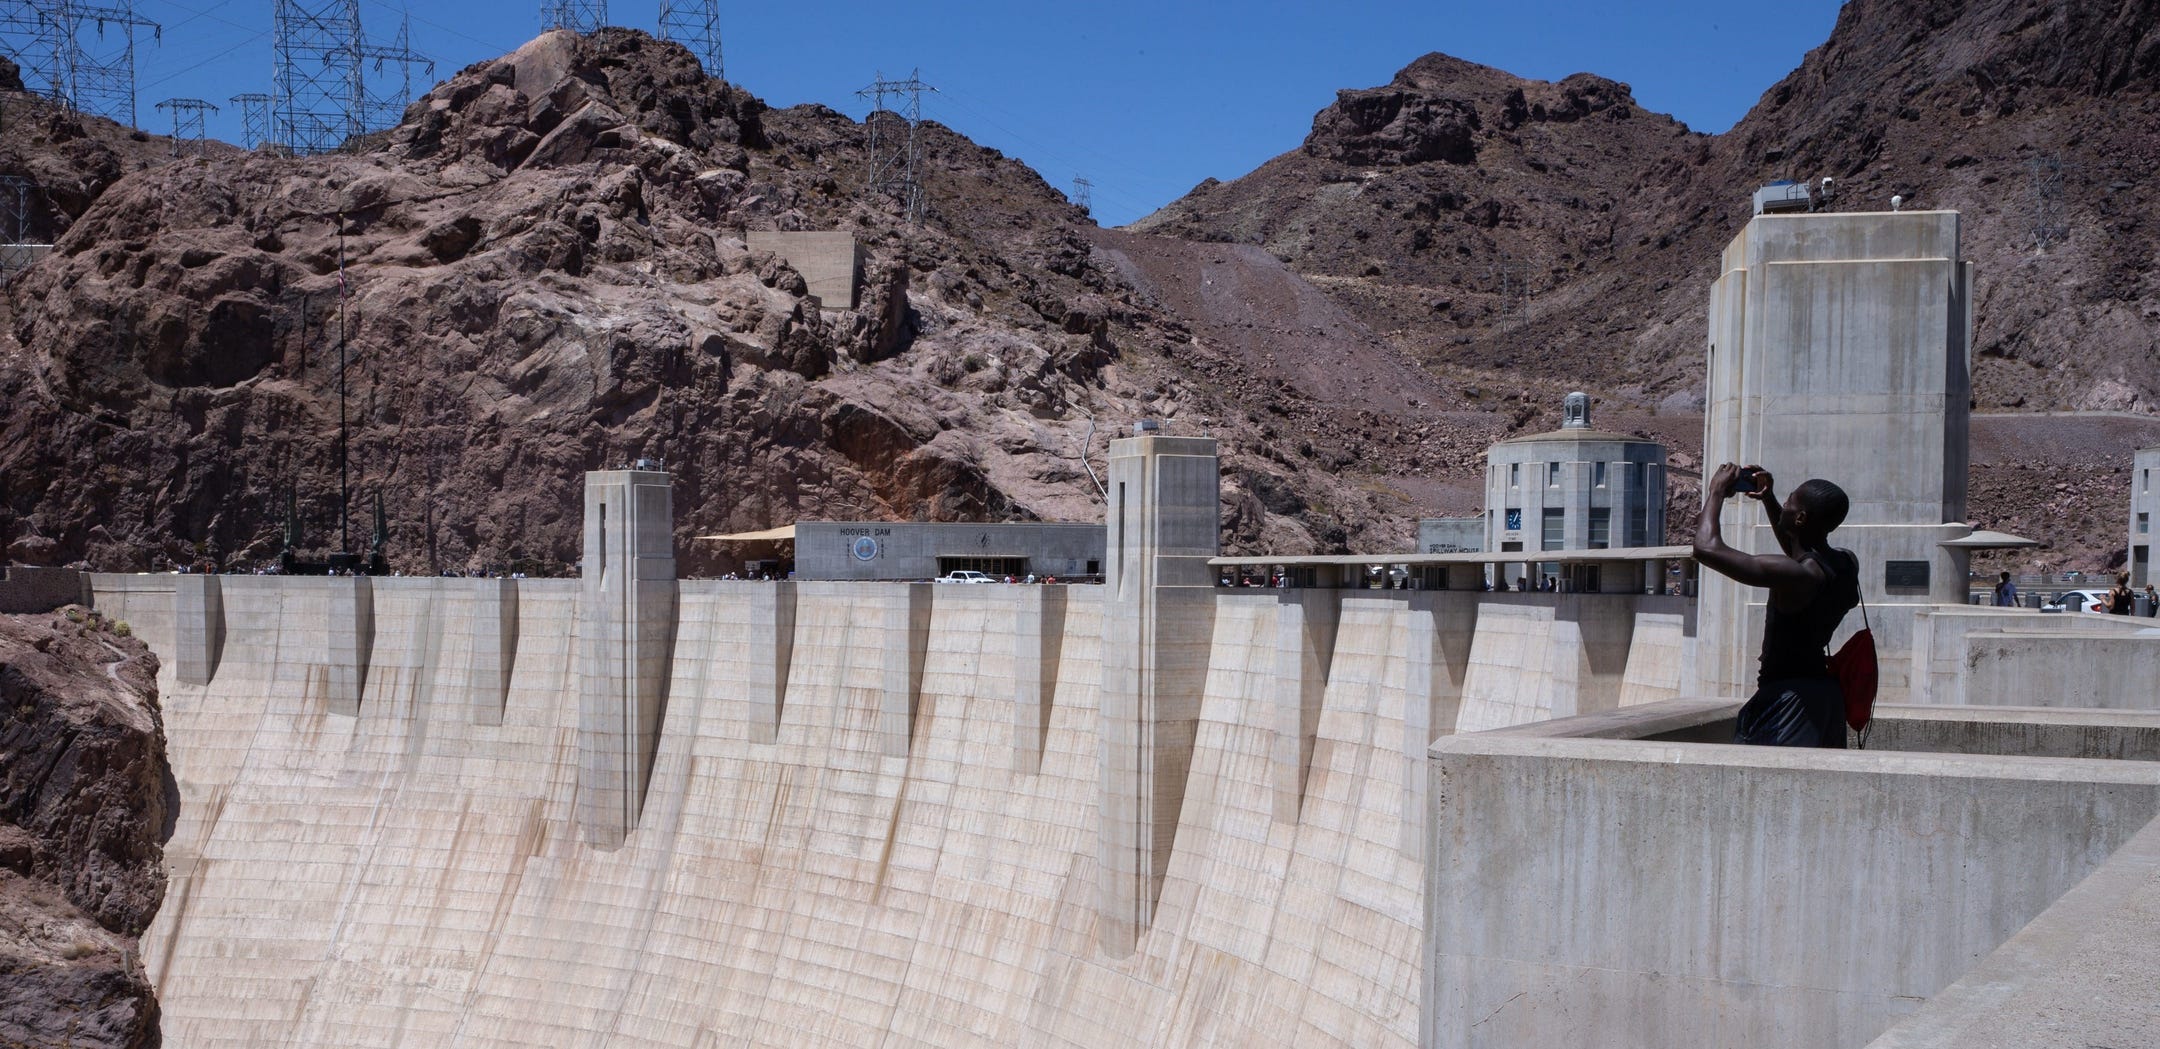 7 Things You Might Not Know About the Hoover Dam